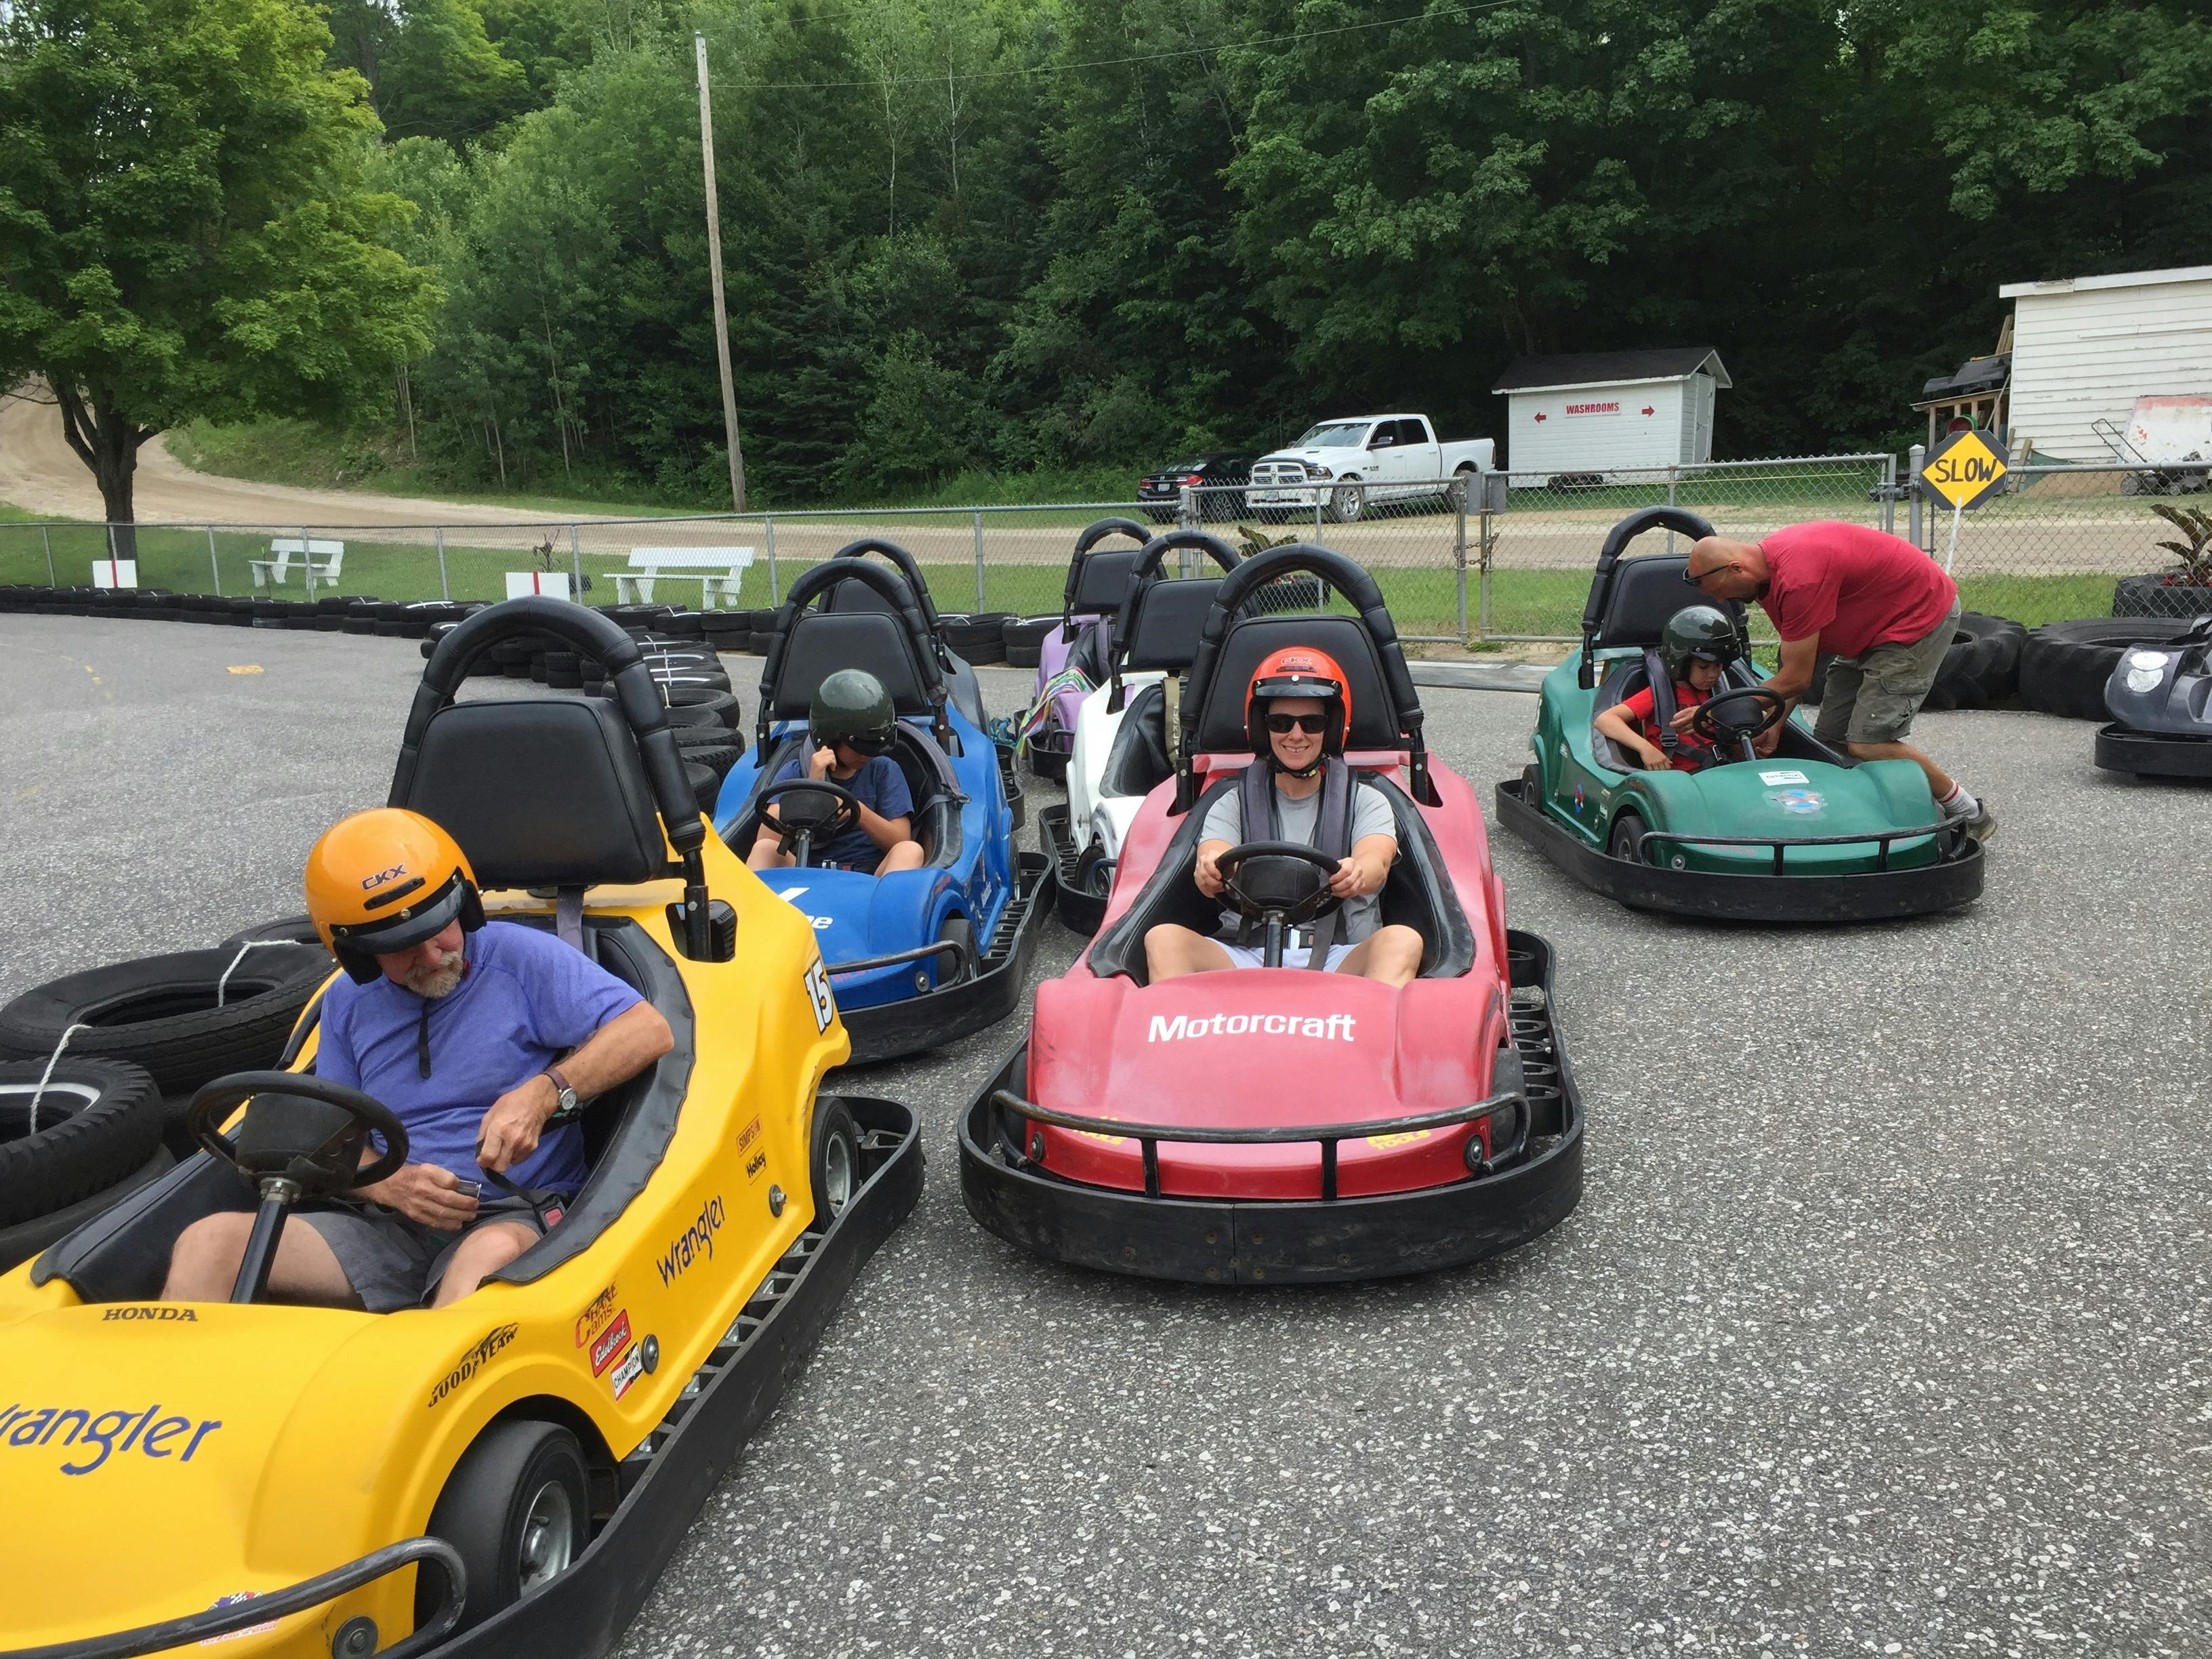 Free stock photo of go carts, Race day at the cart track